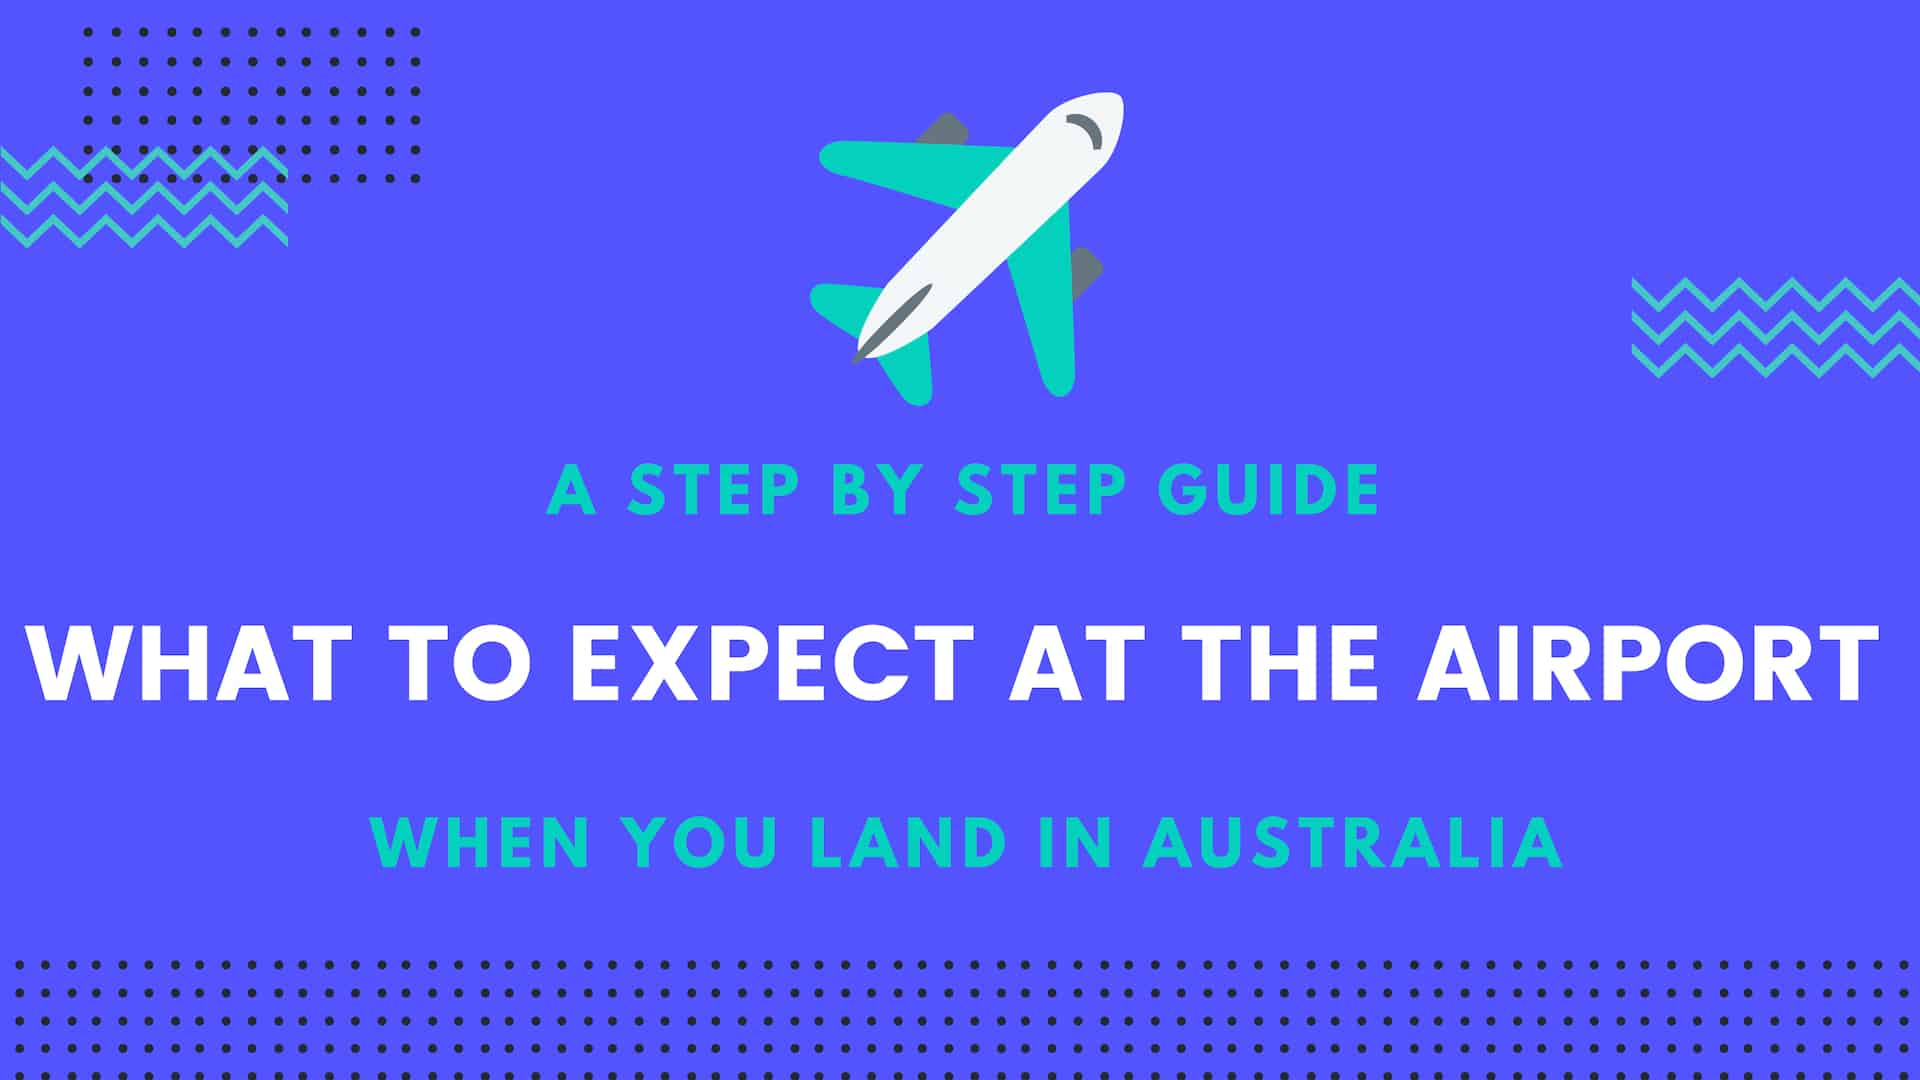 What to expect at the airport when you land in Australia